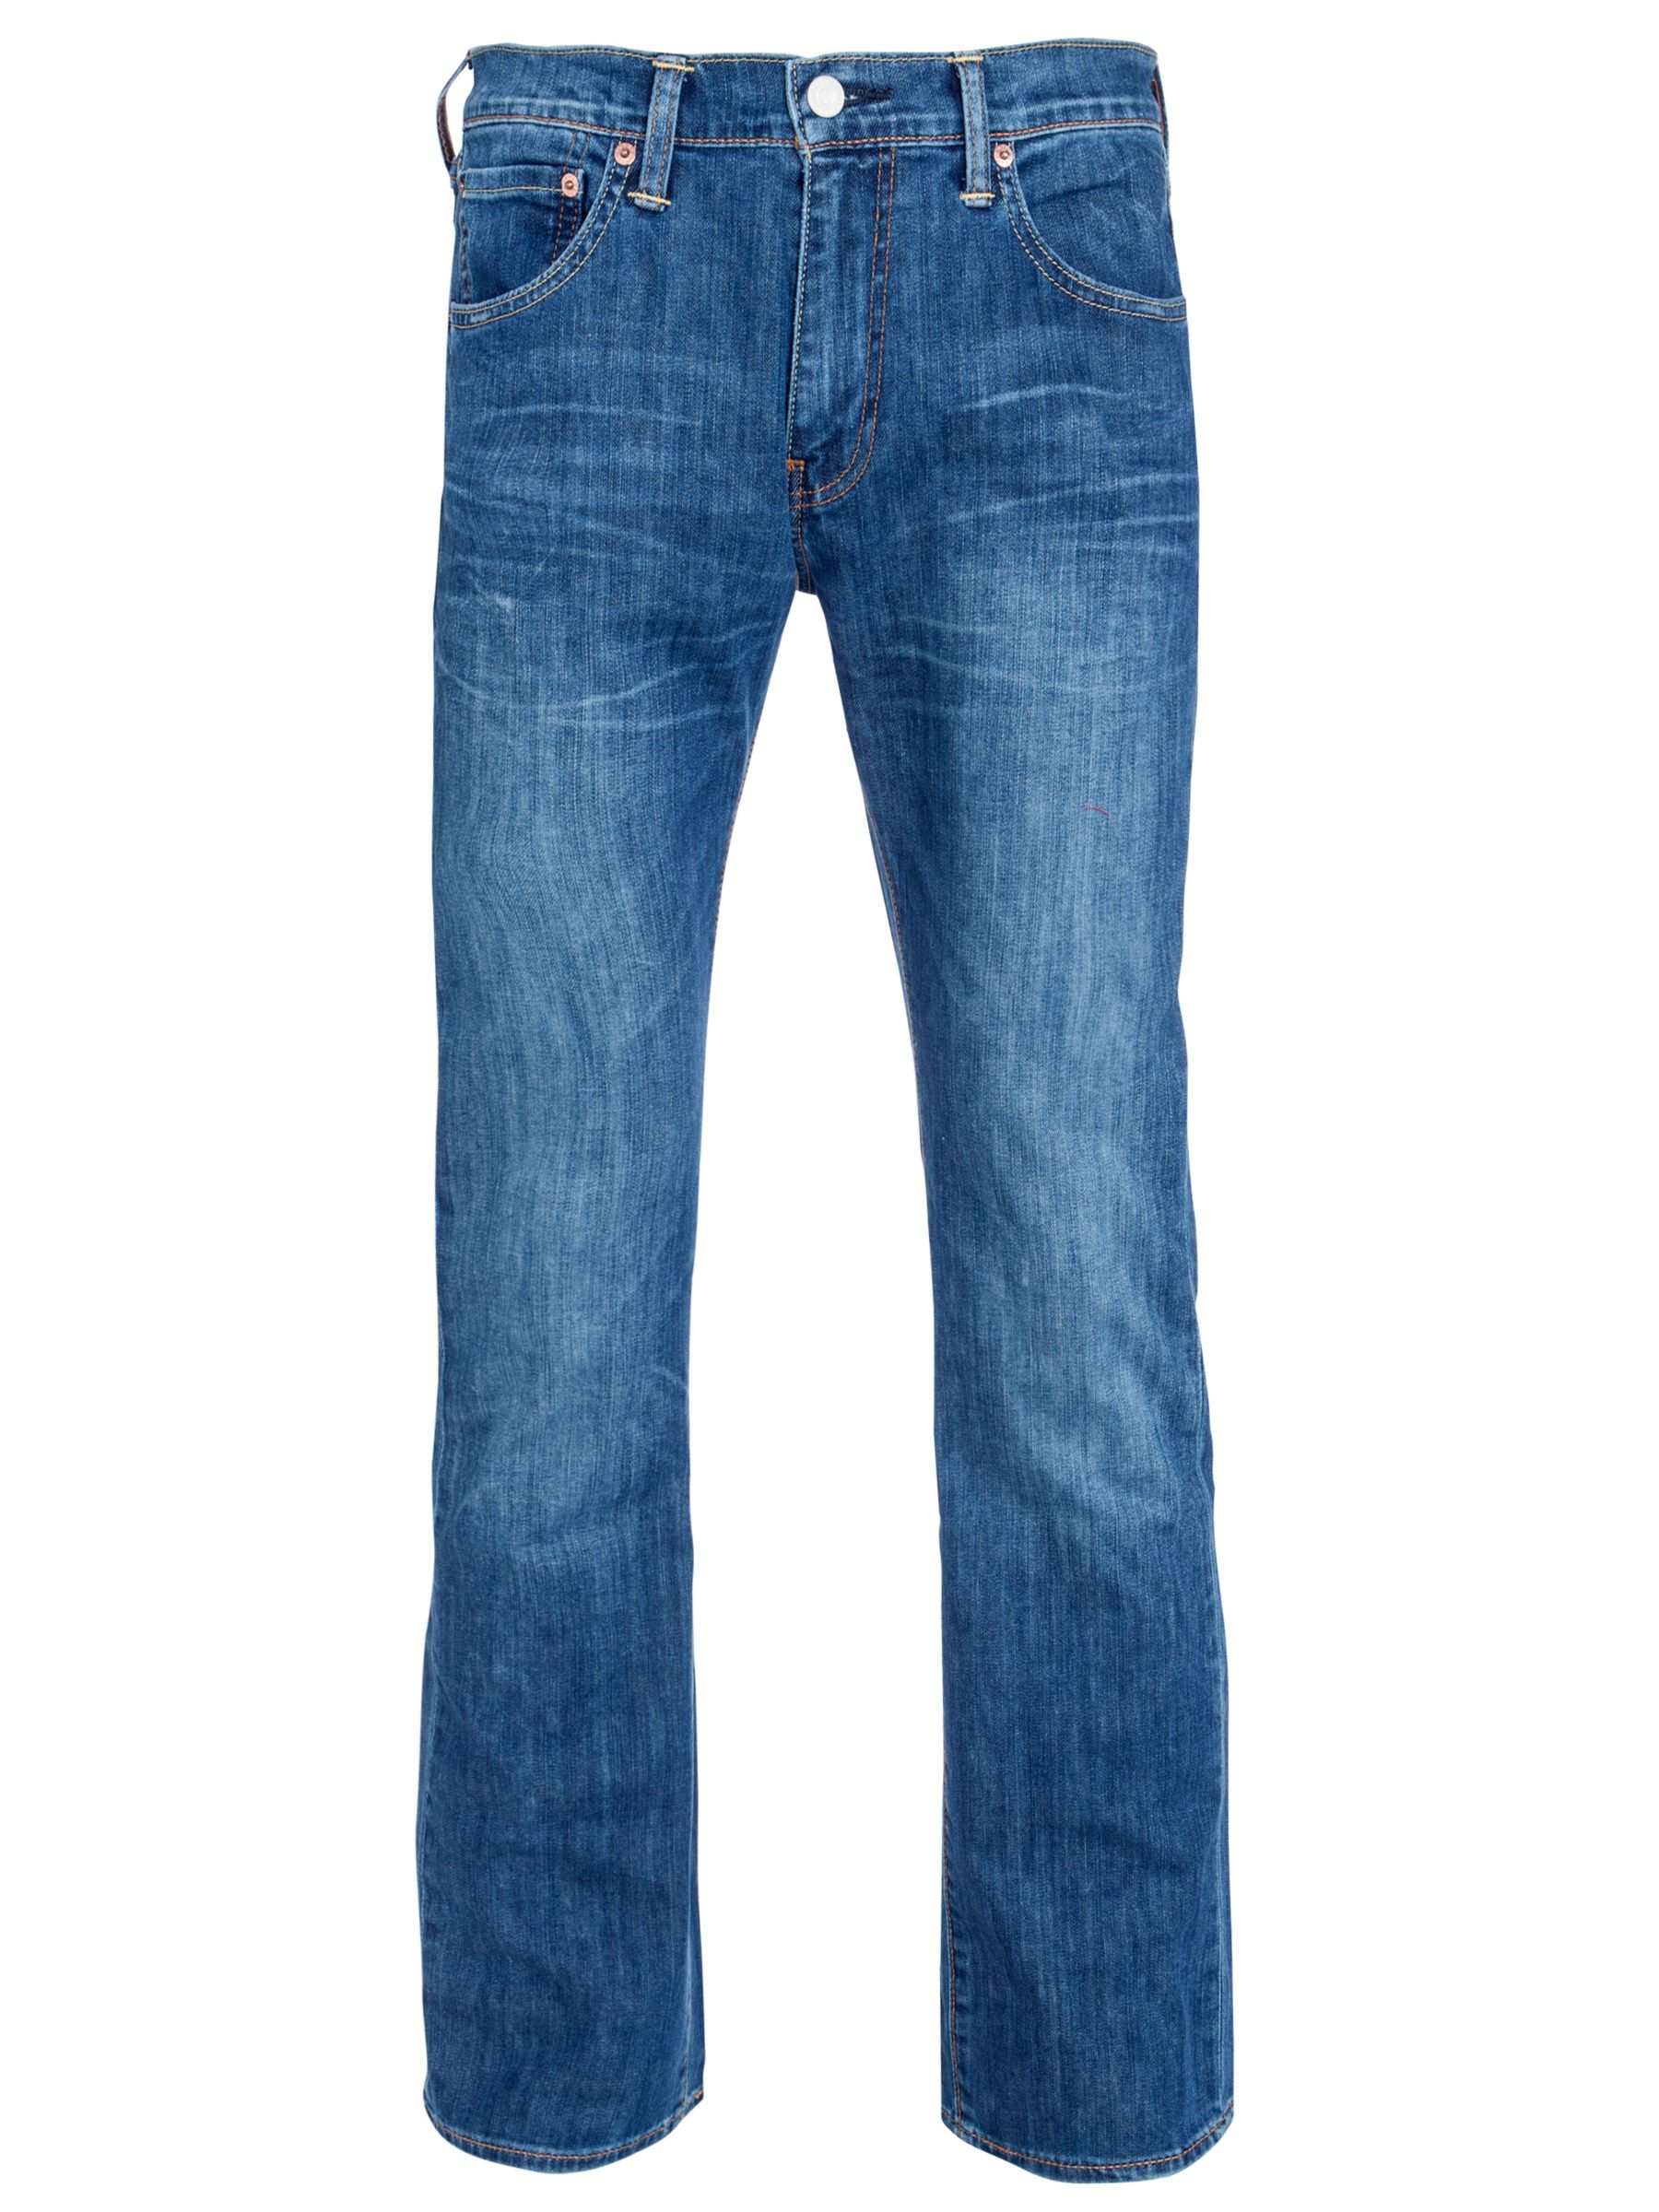 levi's 527 bootcut mostly mid blue off 